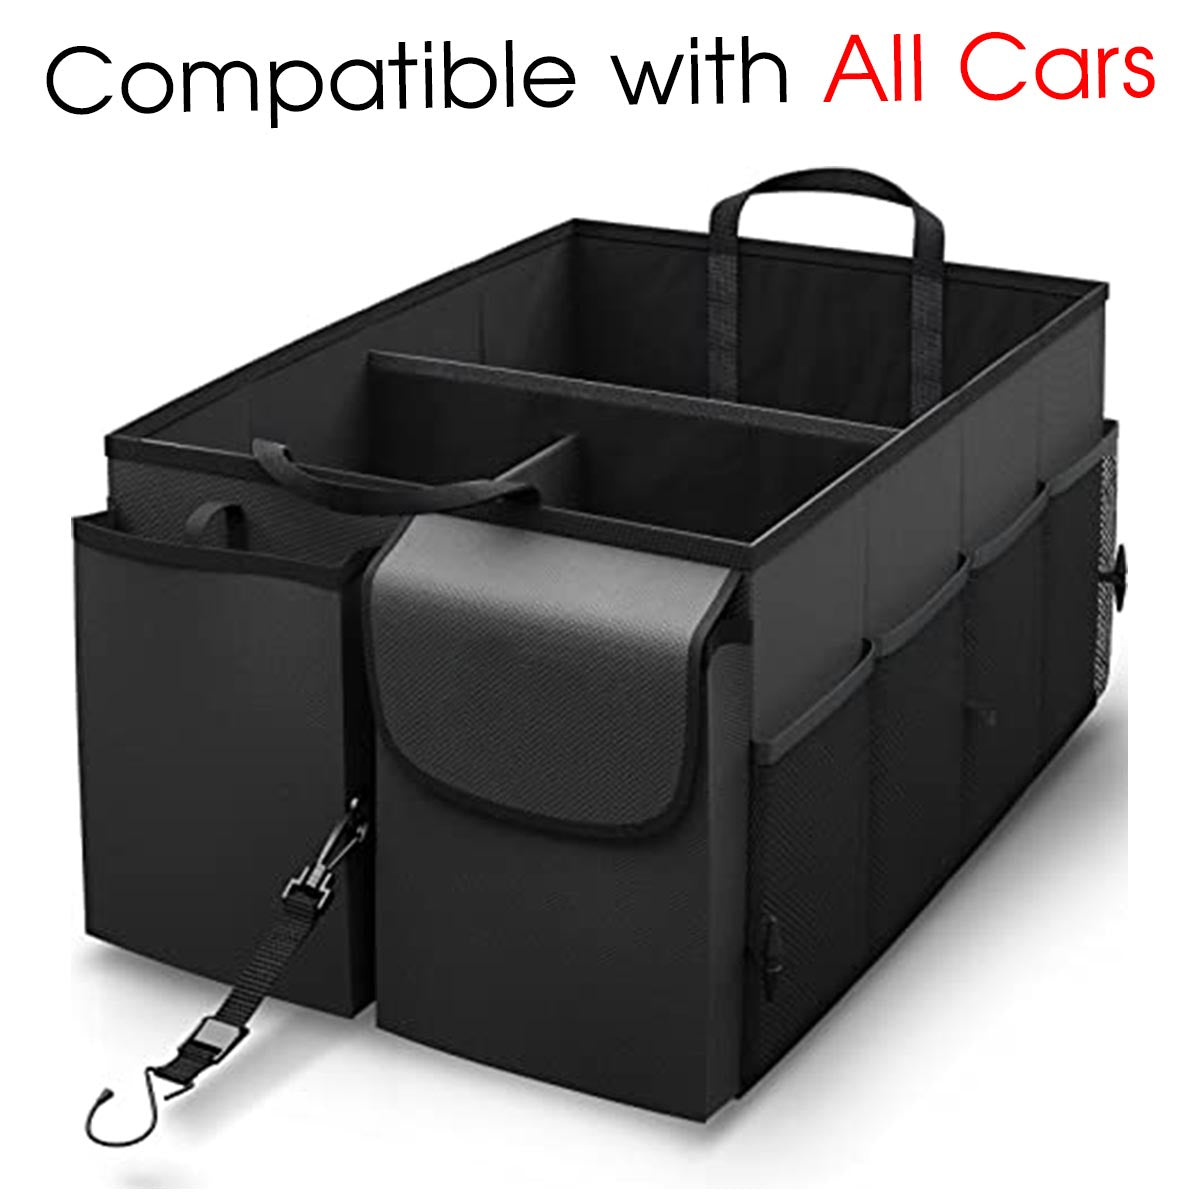 Car Trunk Organizer - Collapsible, Custom fit for All Cars, Multi-Compartment Automotive SUV Car Organizer for Storage w/ Adjustable Straps - Car Accessories for Women and Men WQ12993